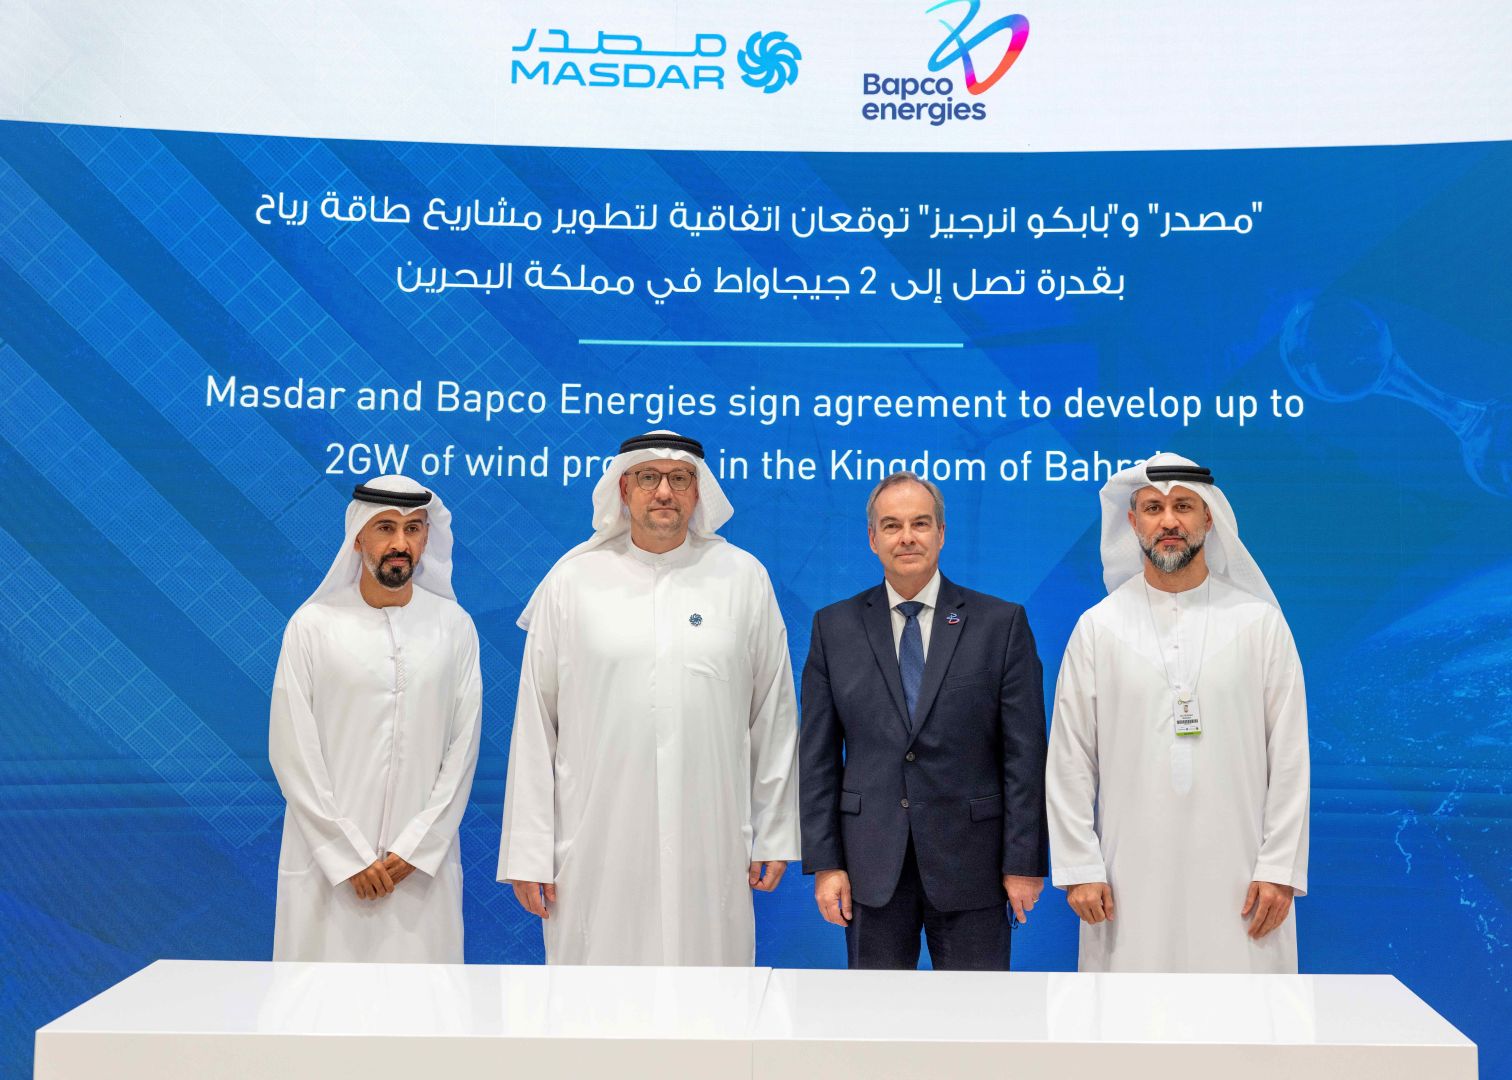 Masdar and Bapco Energies to develop up to 2GW of wind projects in Kingdom of Bahrain